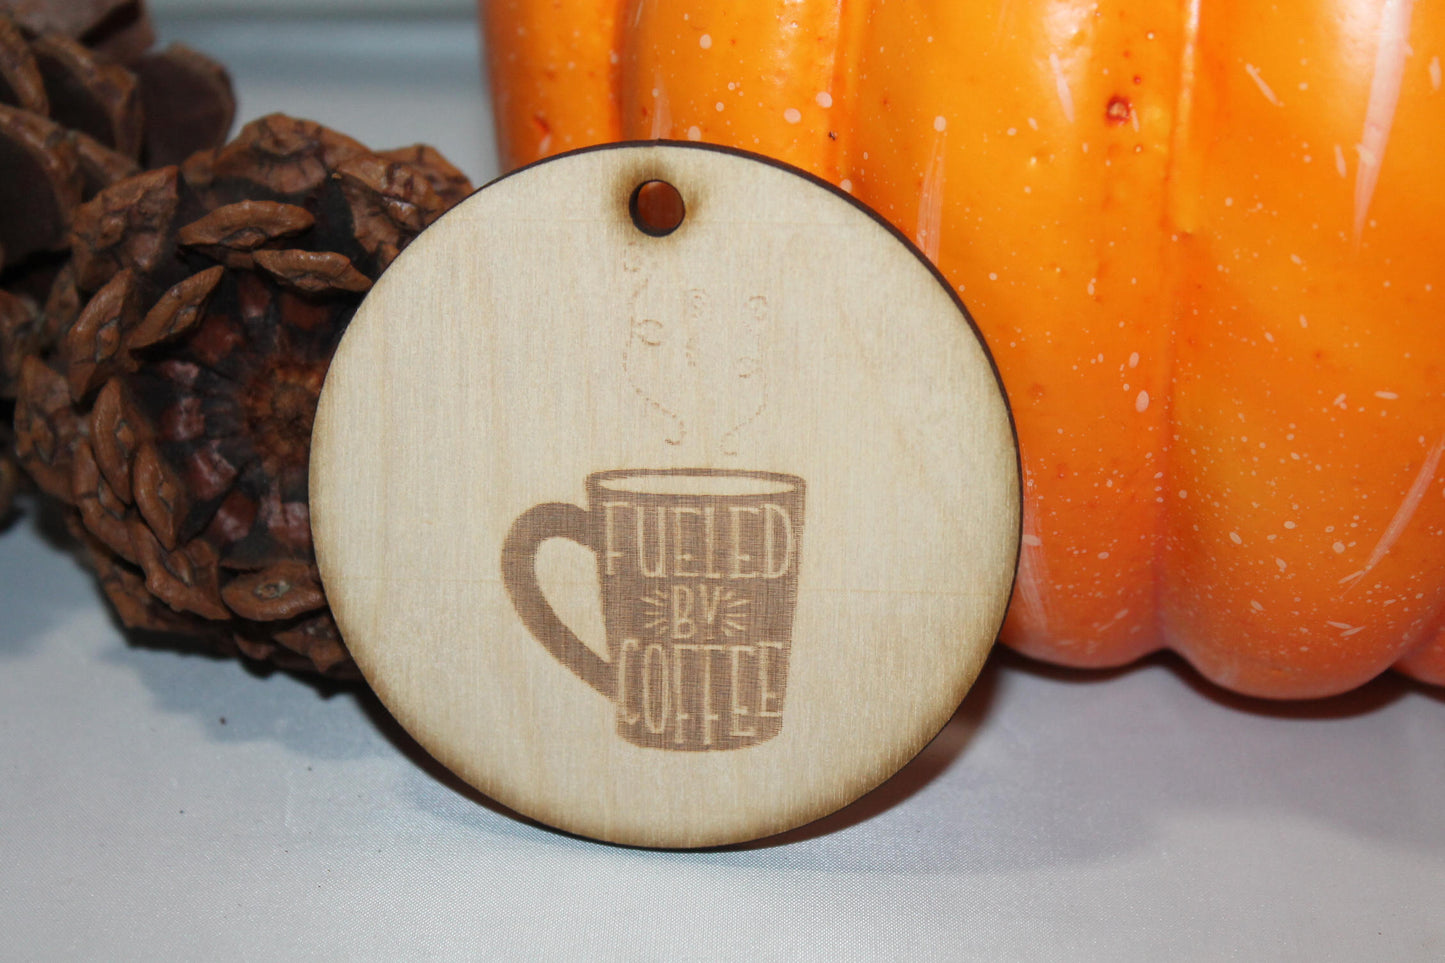 Fueled by Coffee, Coffee, Coffee Ornament,  Custom, Christmas Ornament, Laser Engraved, Wood Cut Out, Footstepsinthepast